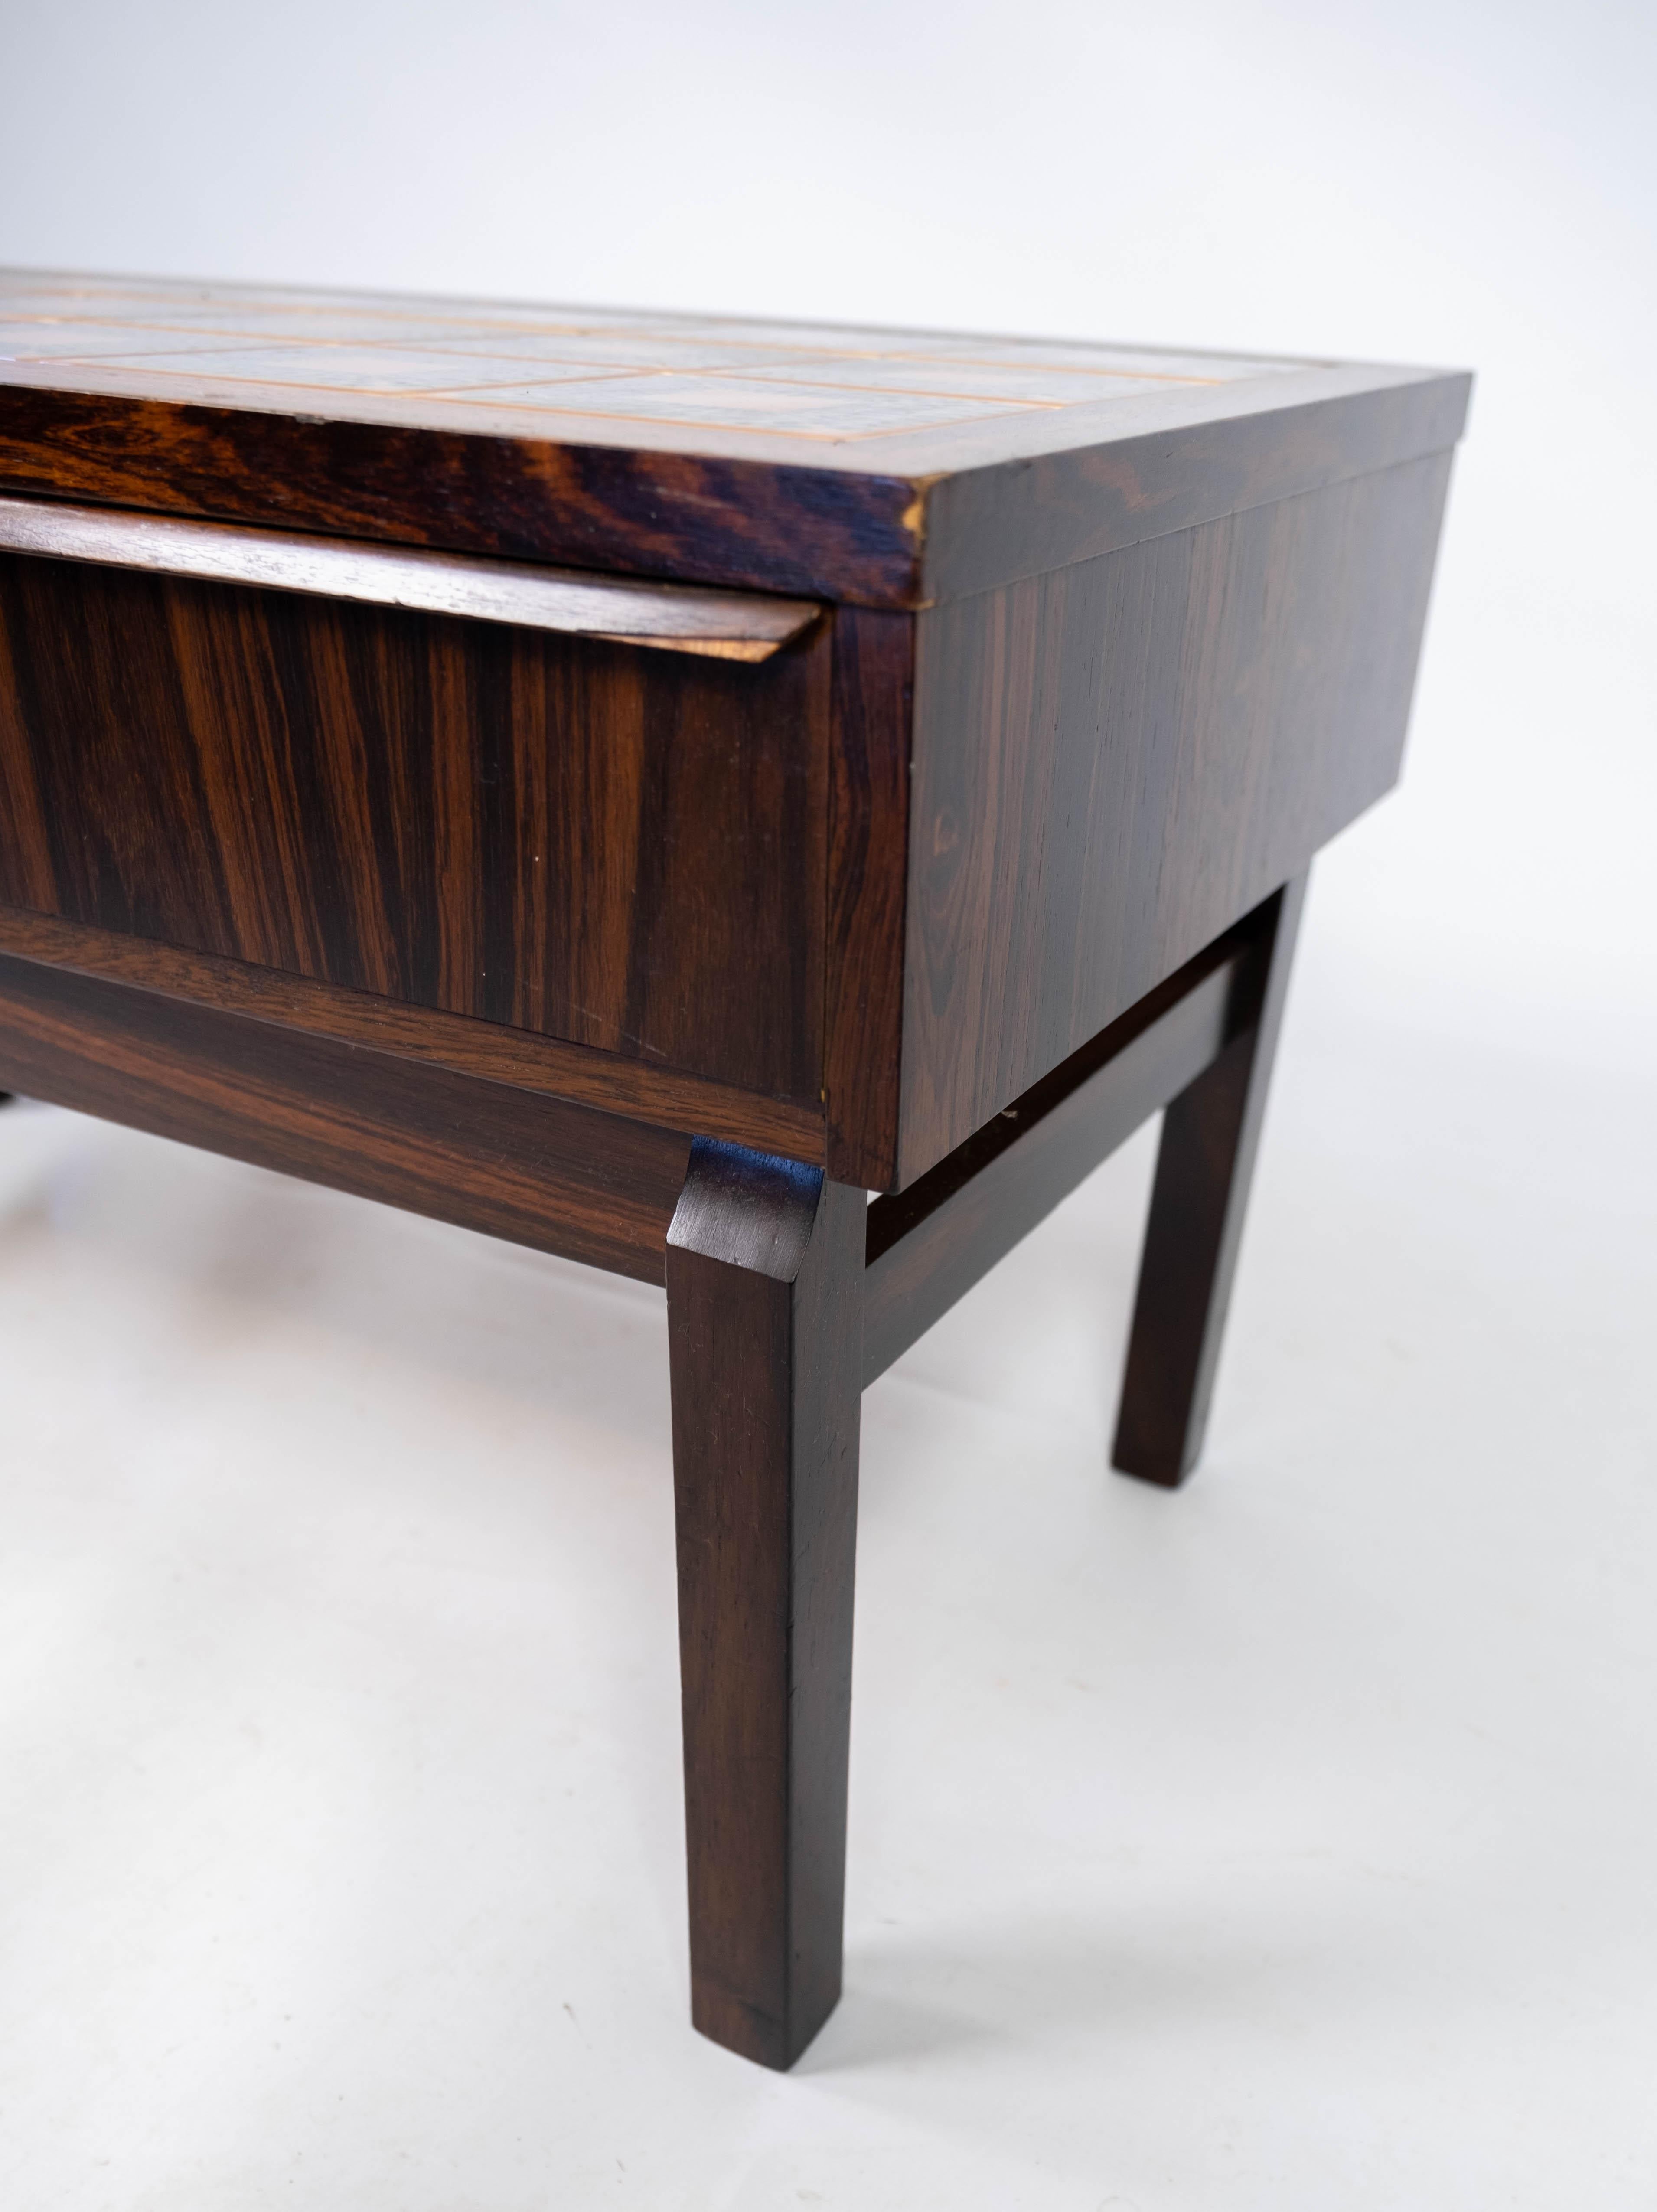 Mid-20th Century Low Chest in Rosewood and Tiles, of Danish Design from the 1960s For Sale